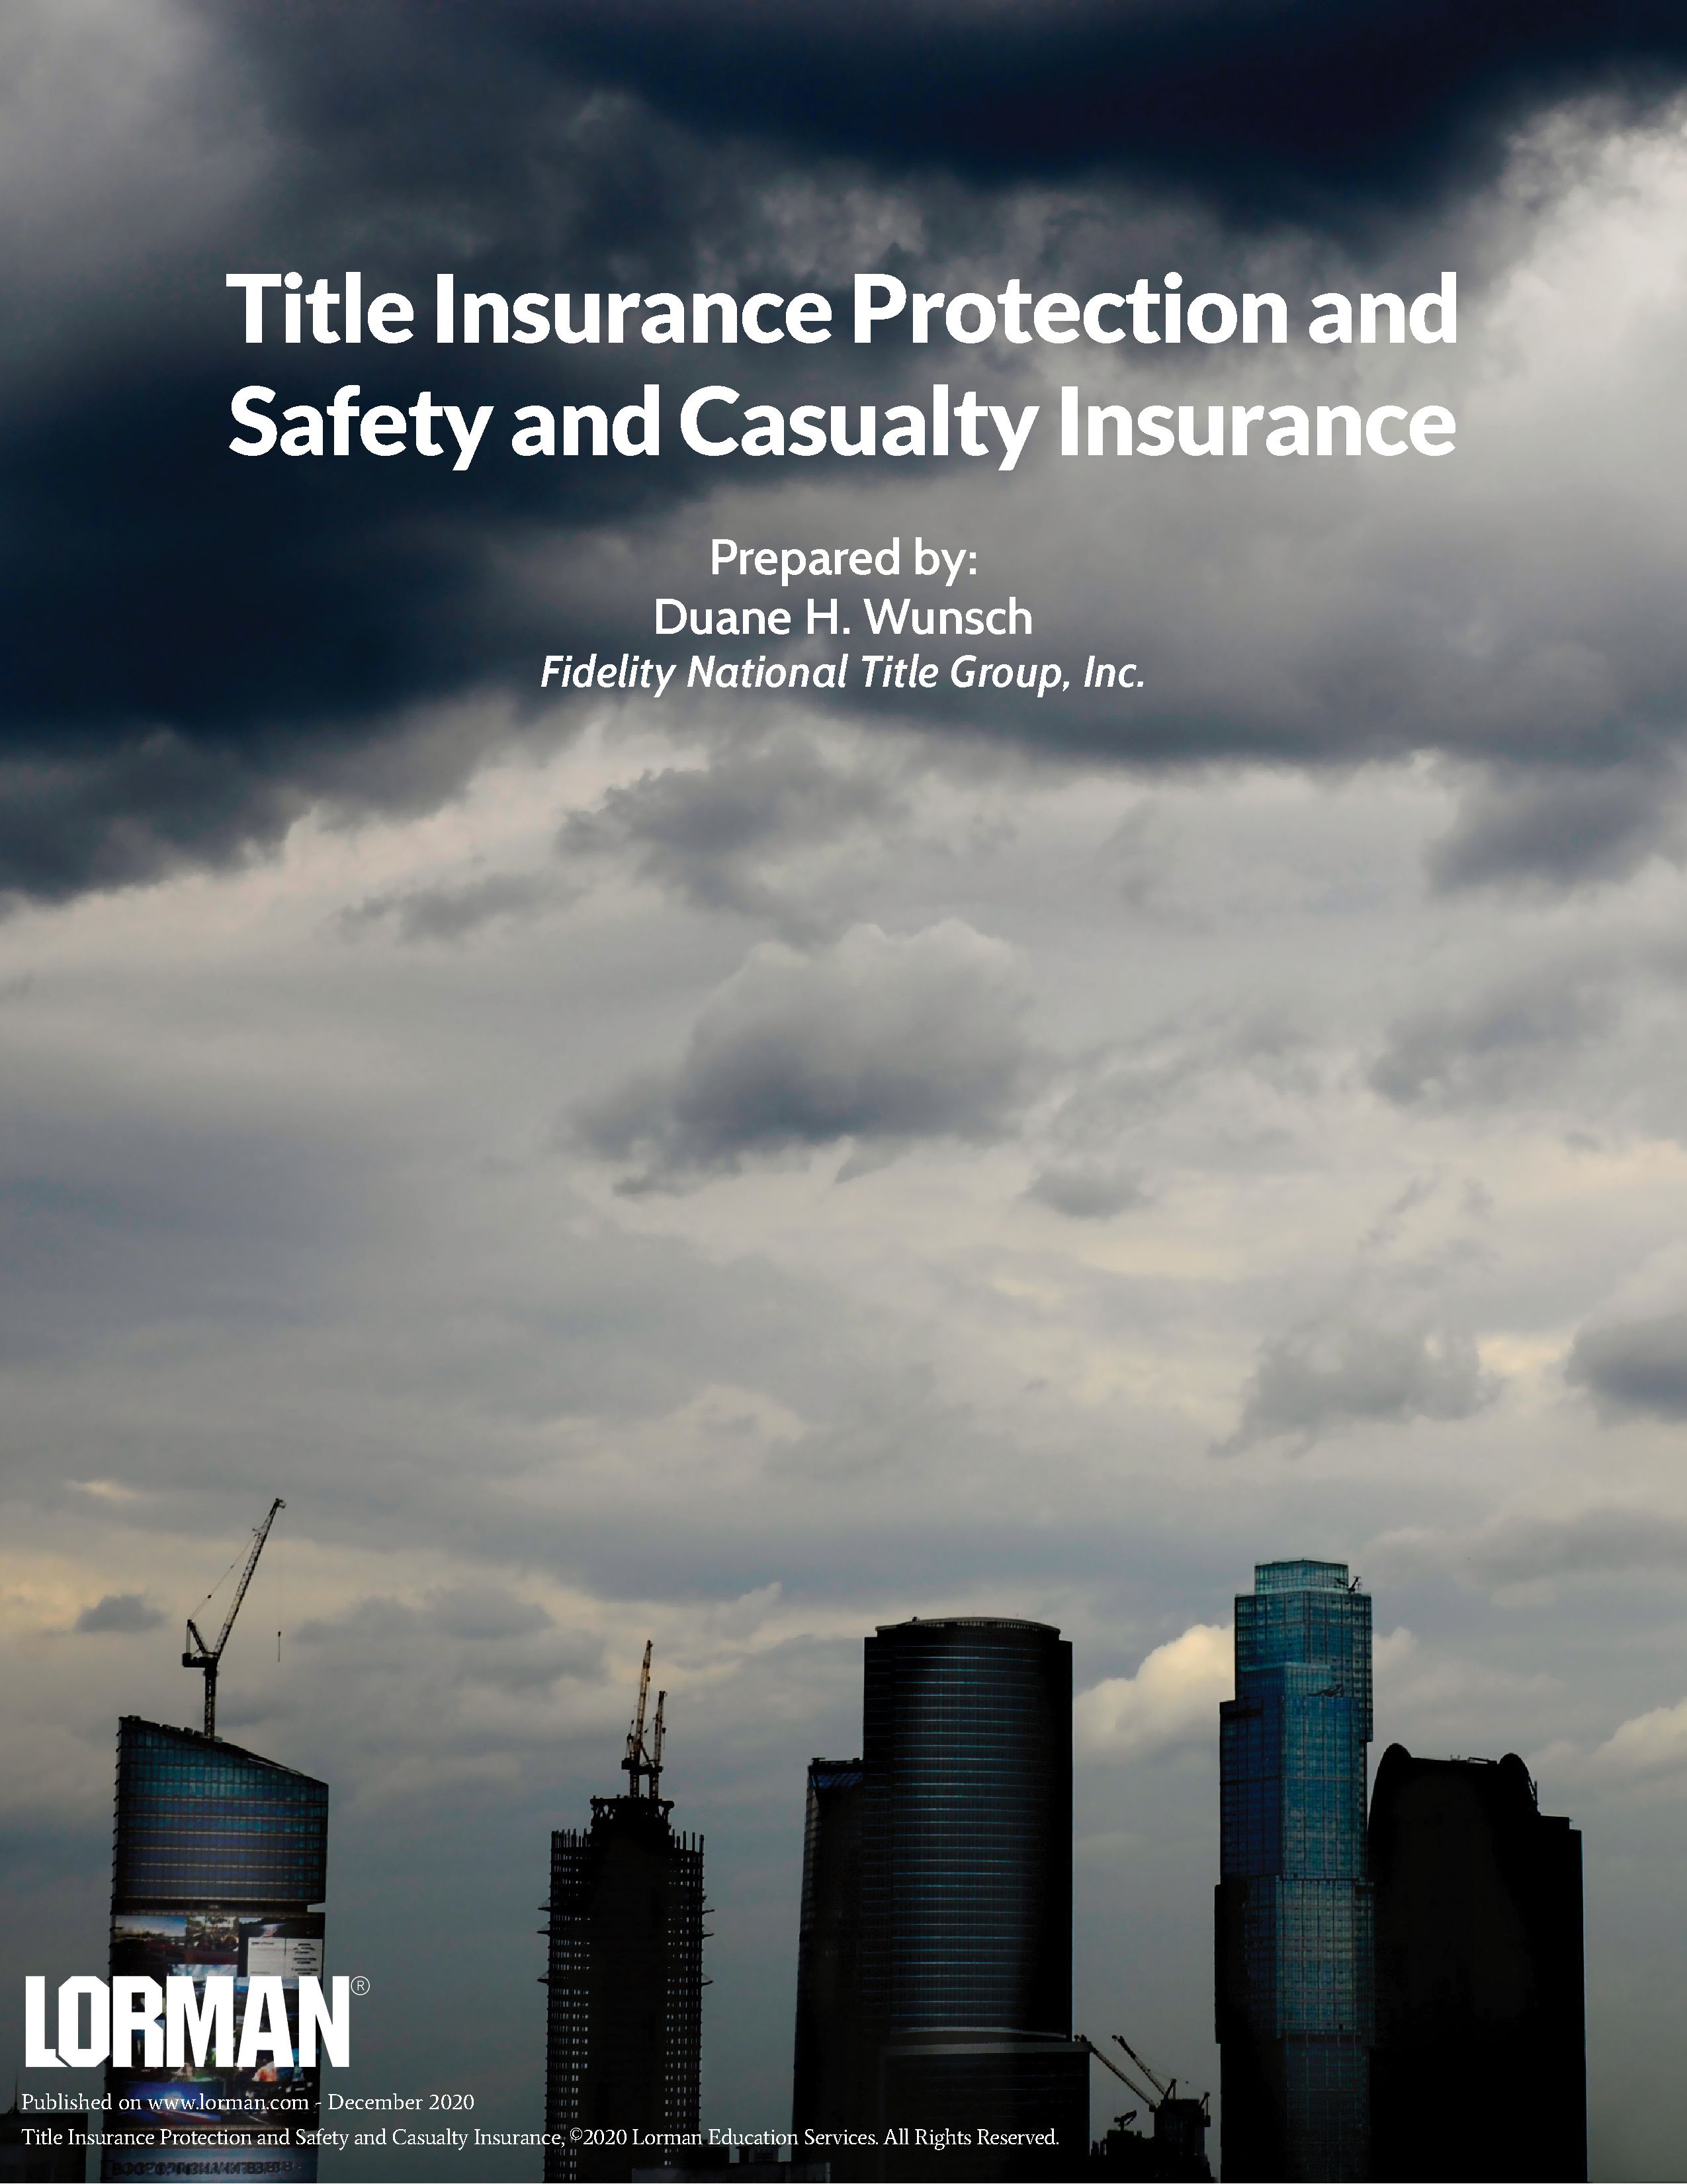 Title Insurance Protection and Safety and Casualty Insurance